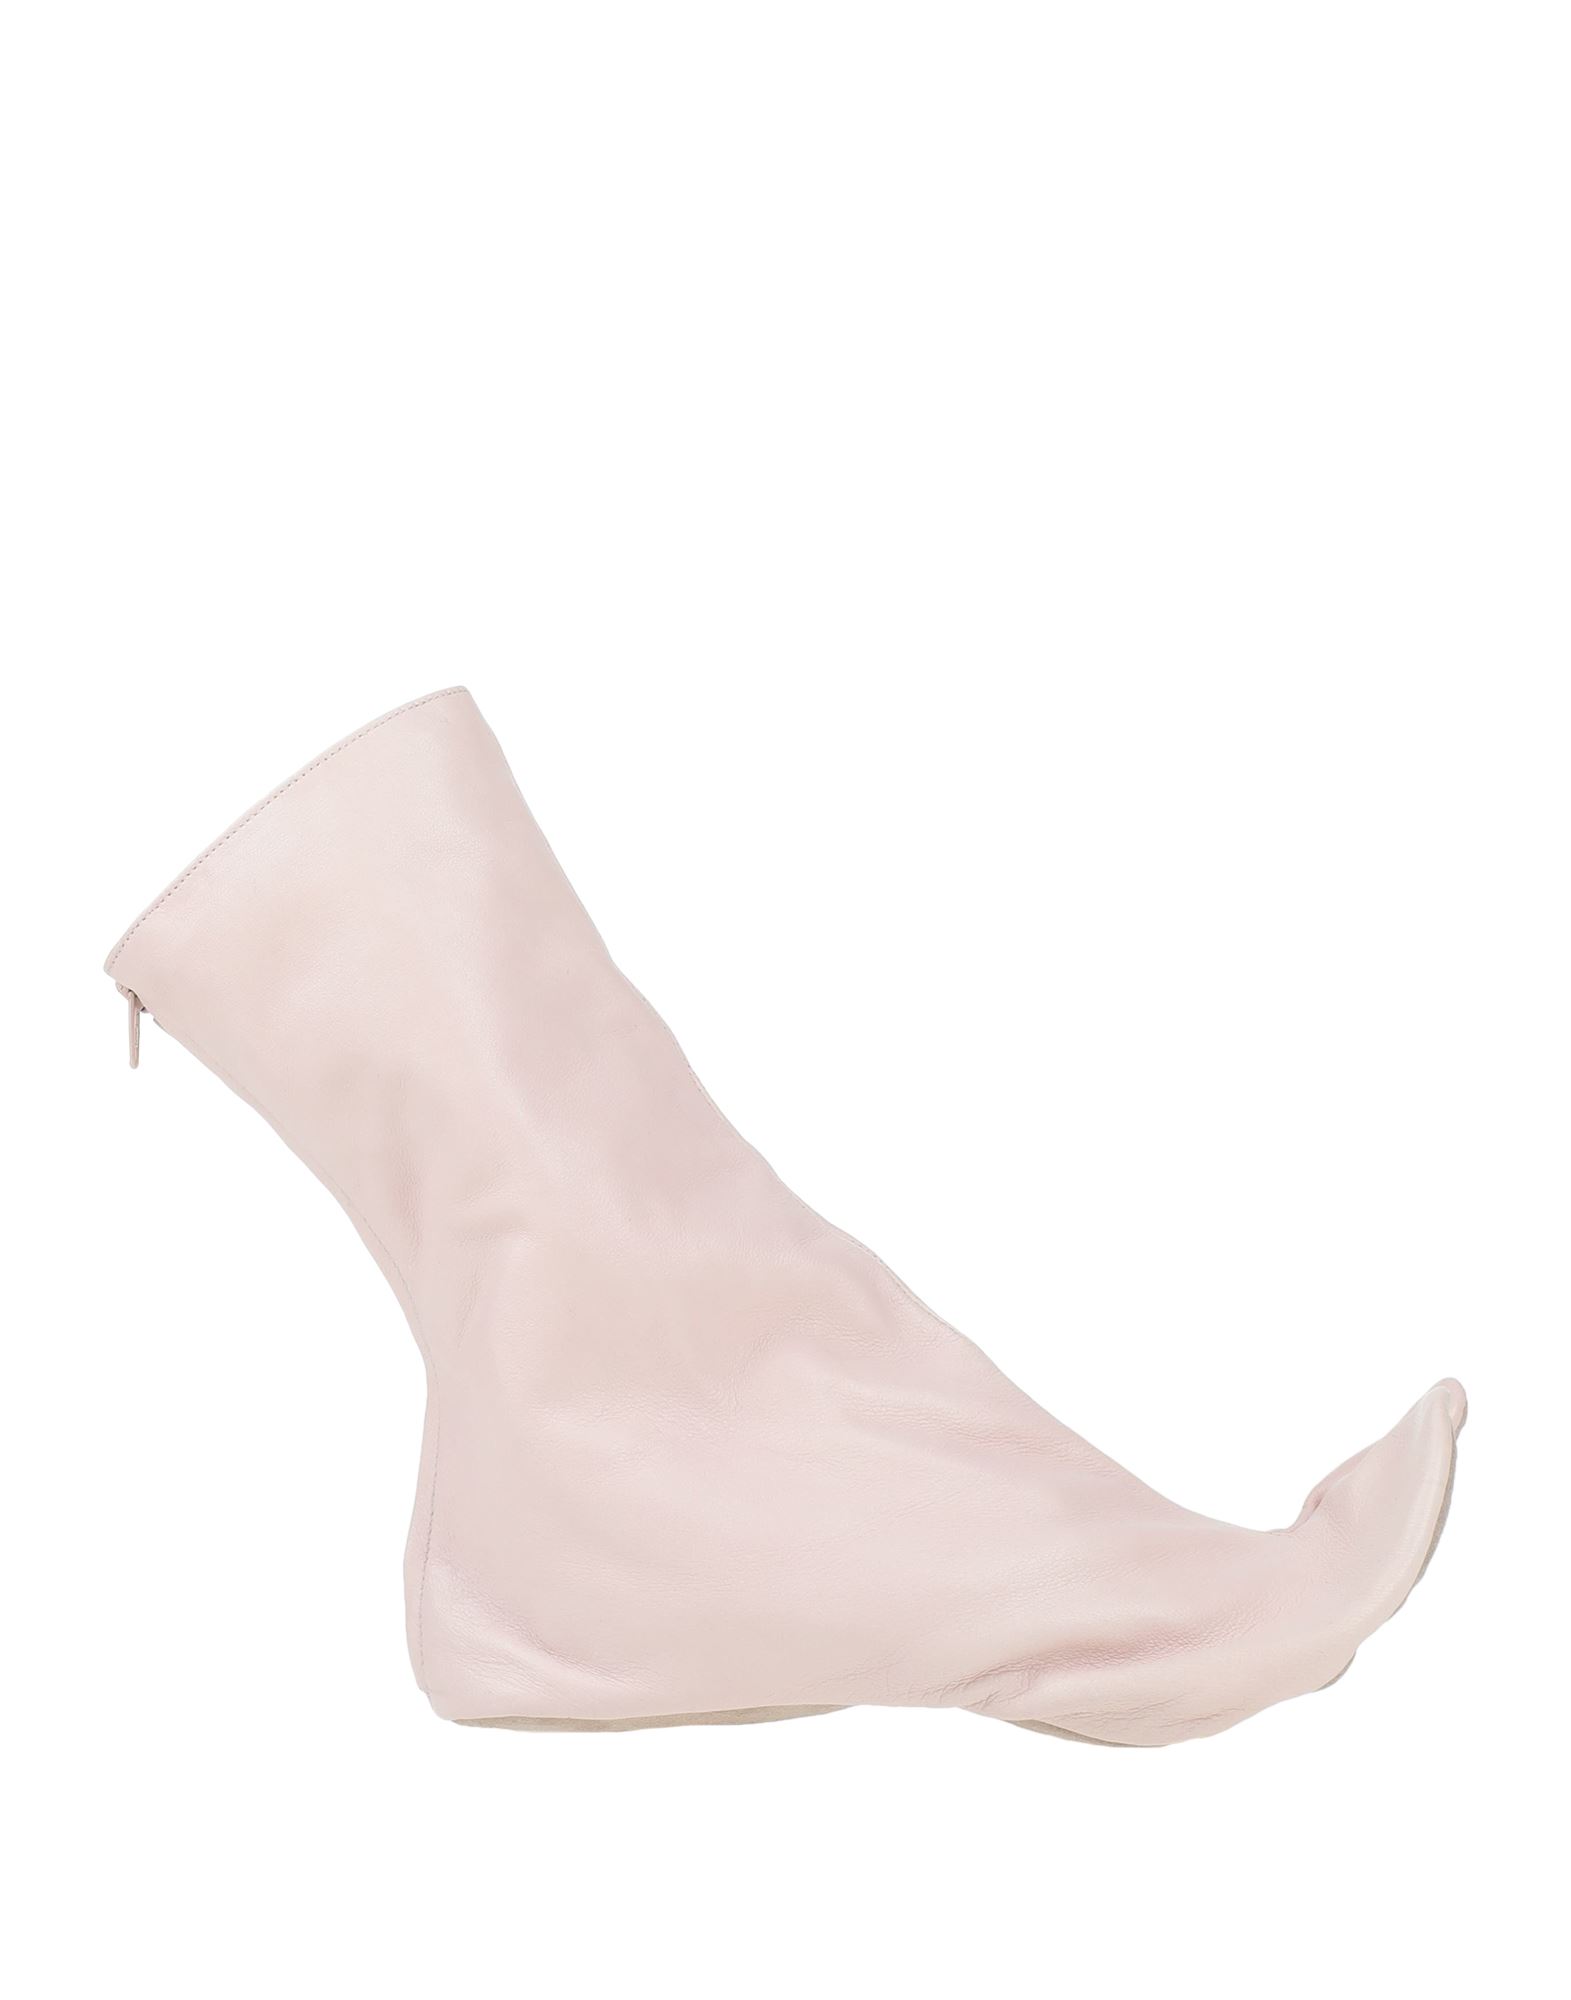 Prada Ankle Boots In Light Pink